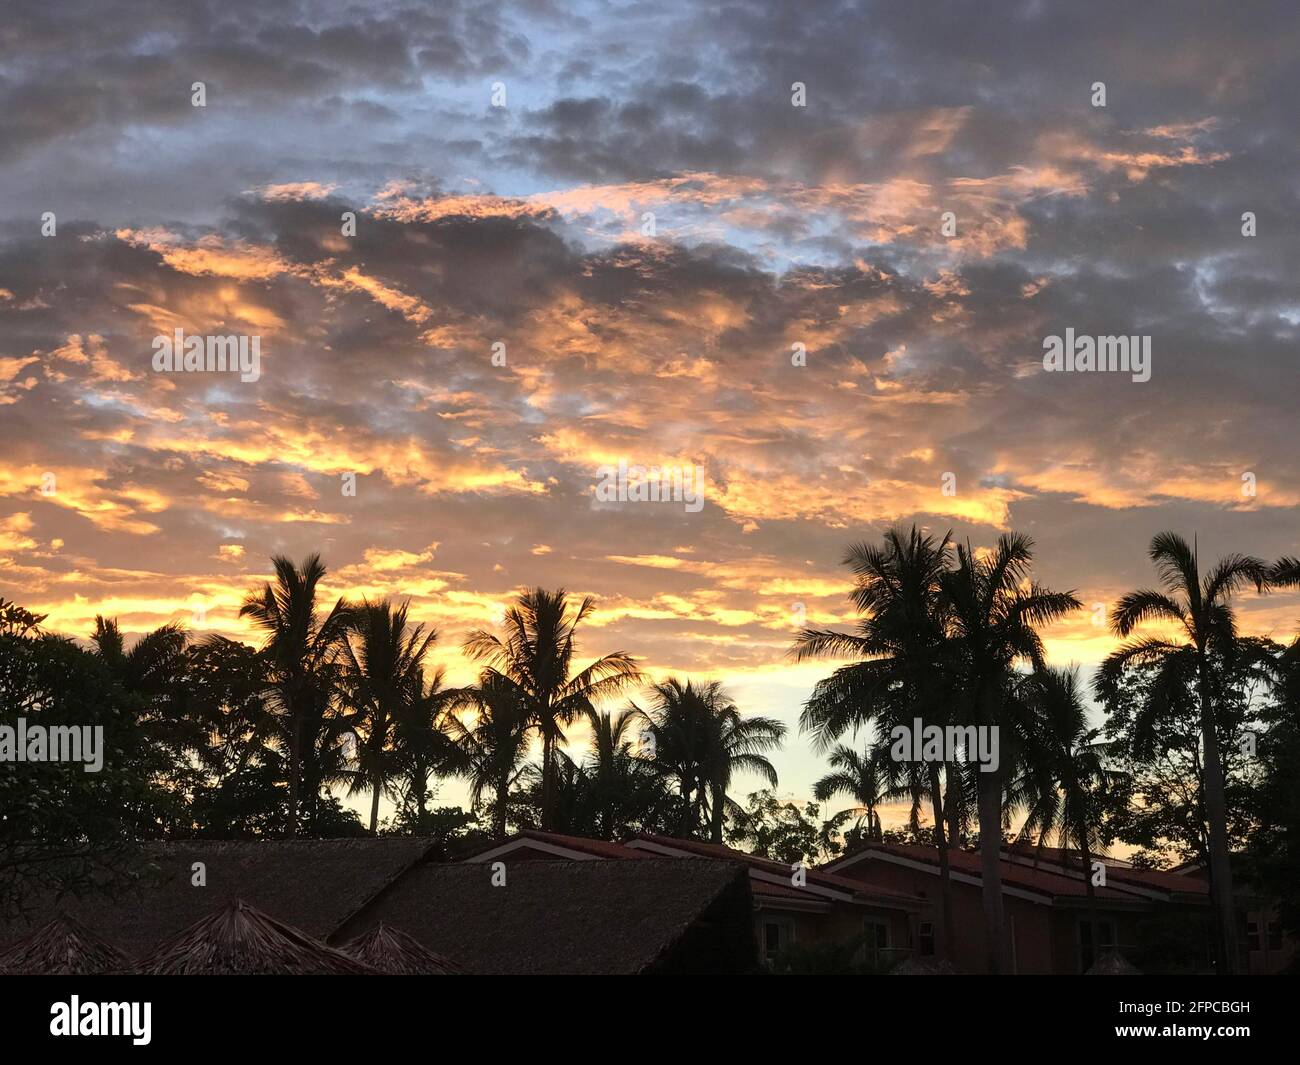 Tropical palms and colorful sunset in Costa Rica Stock Photo